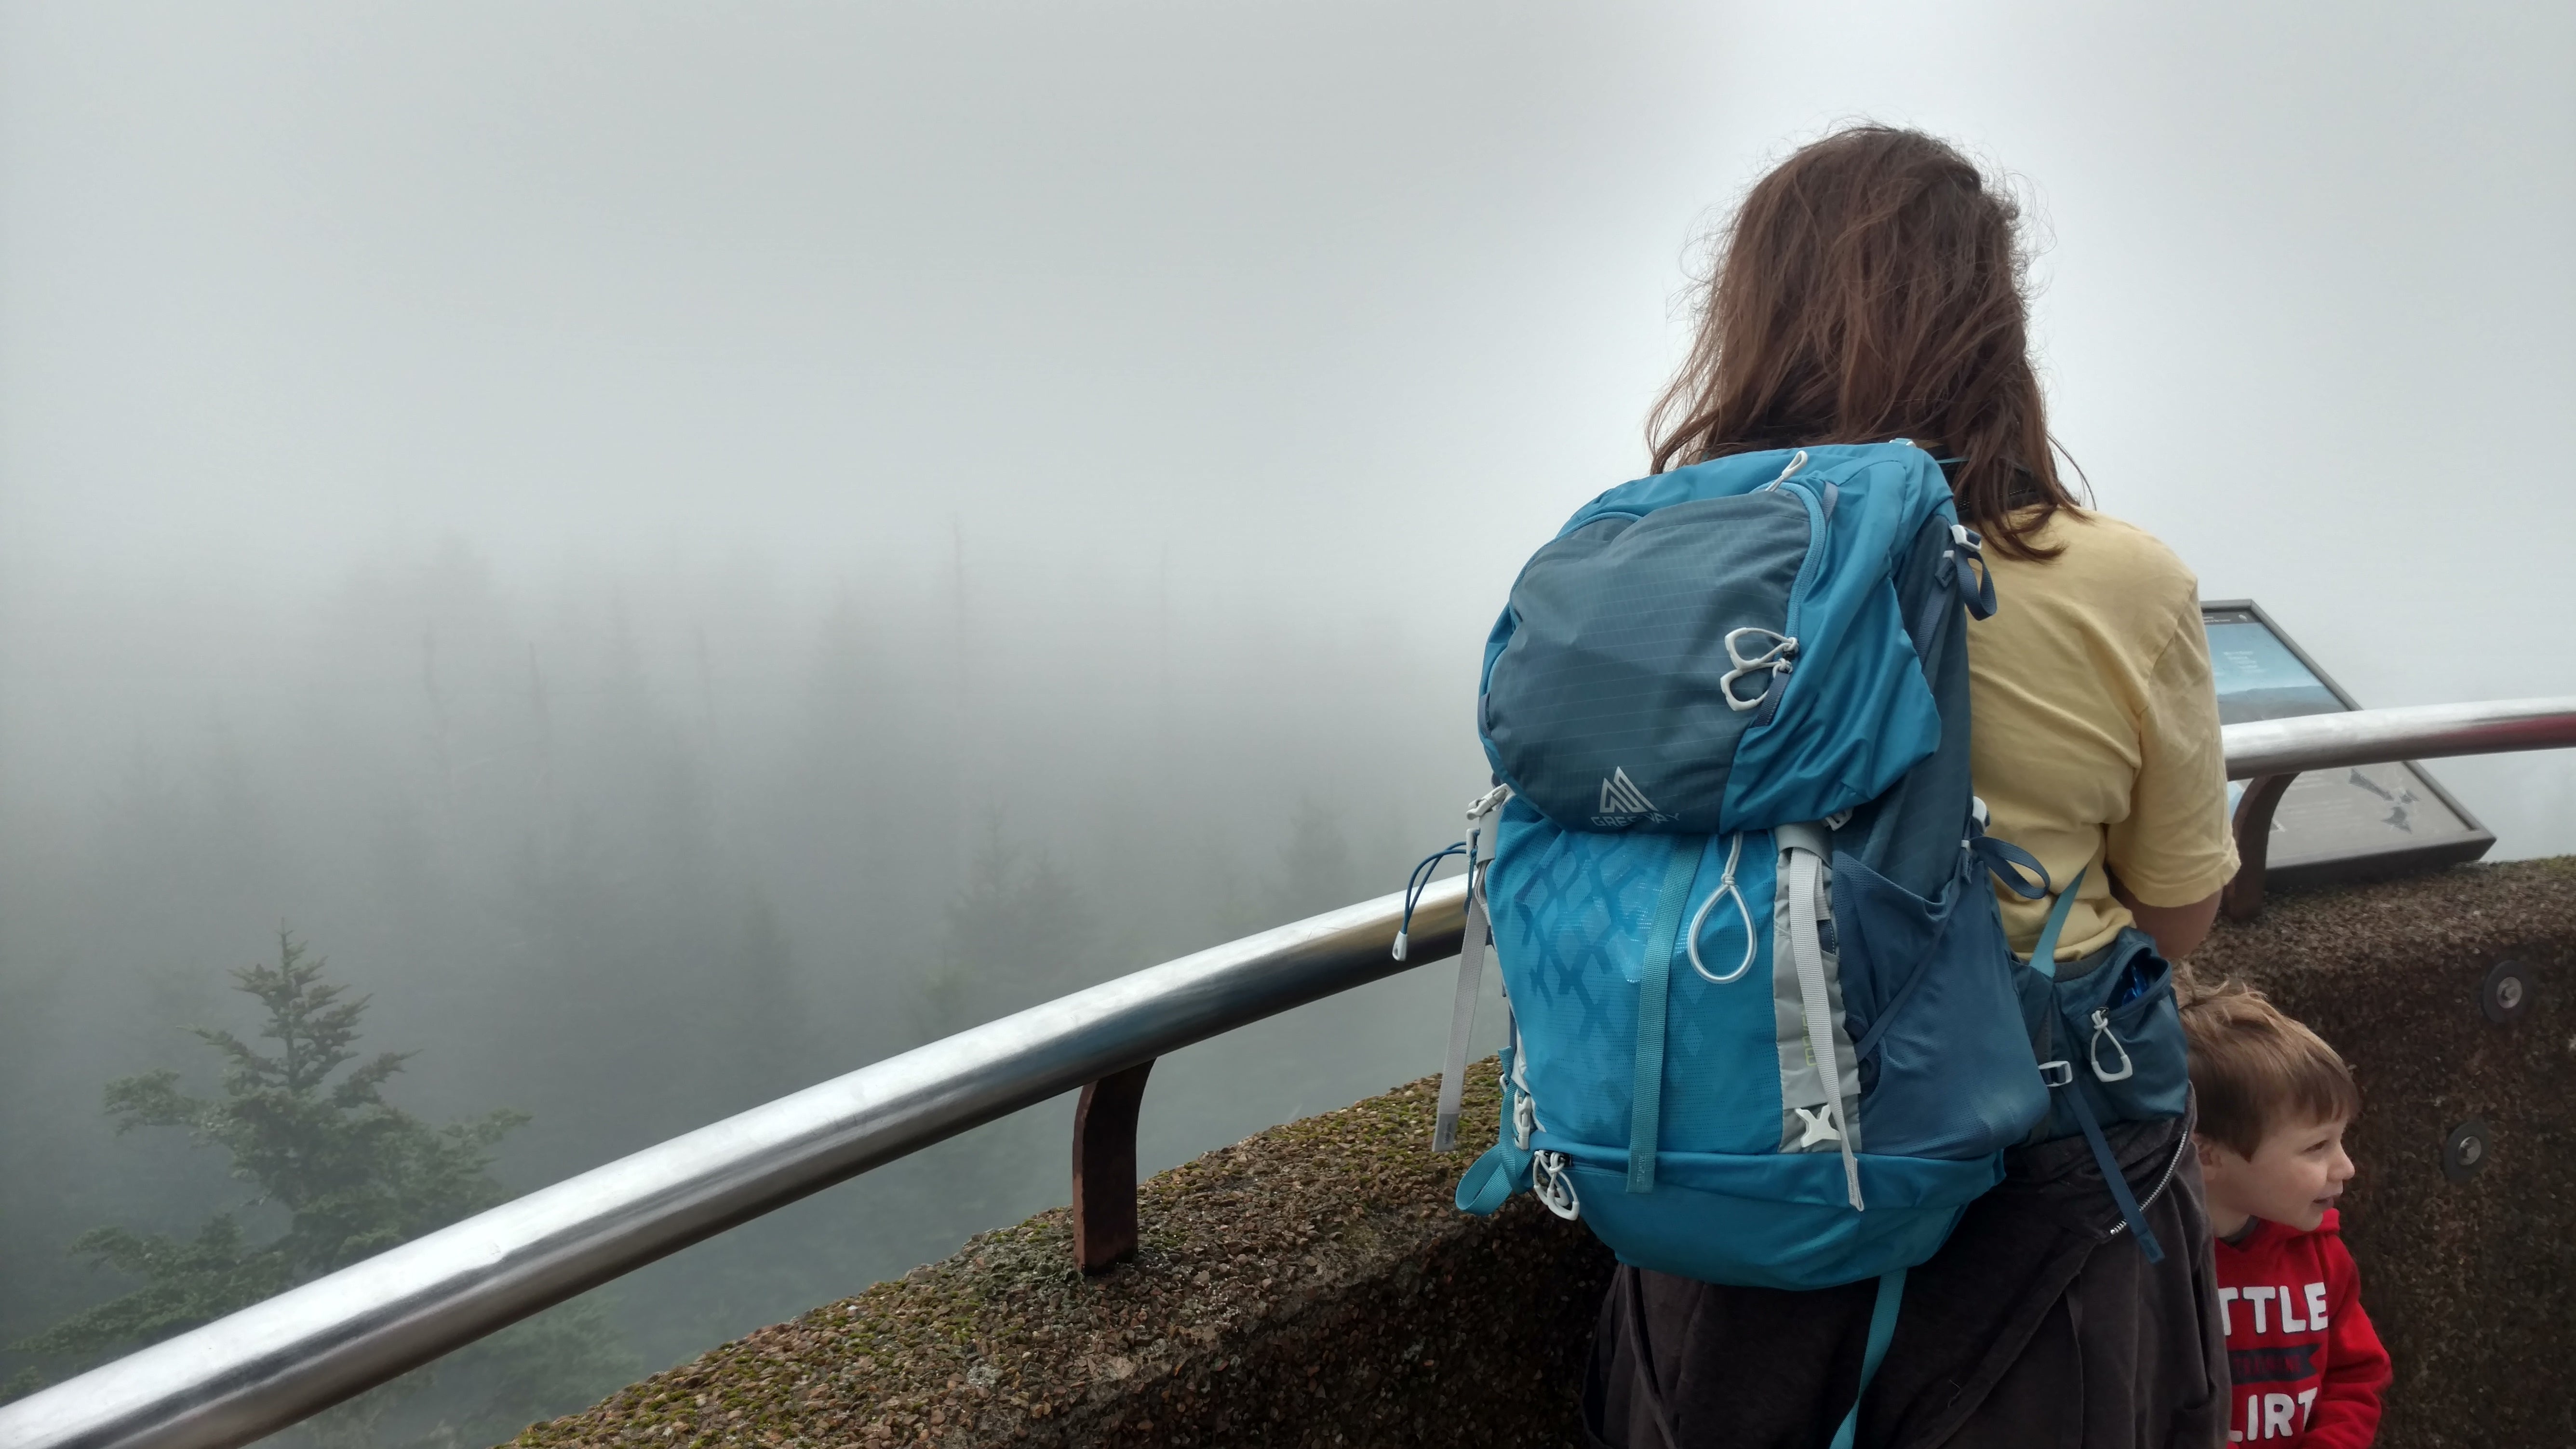 Our foggy view from the top of Clingman's Dome